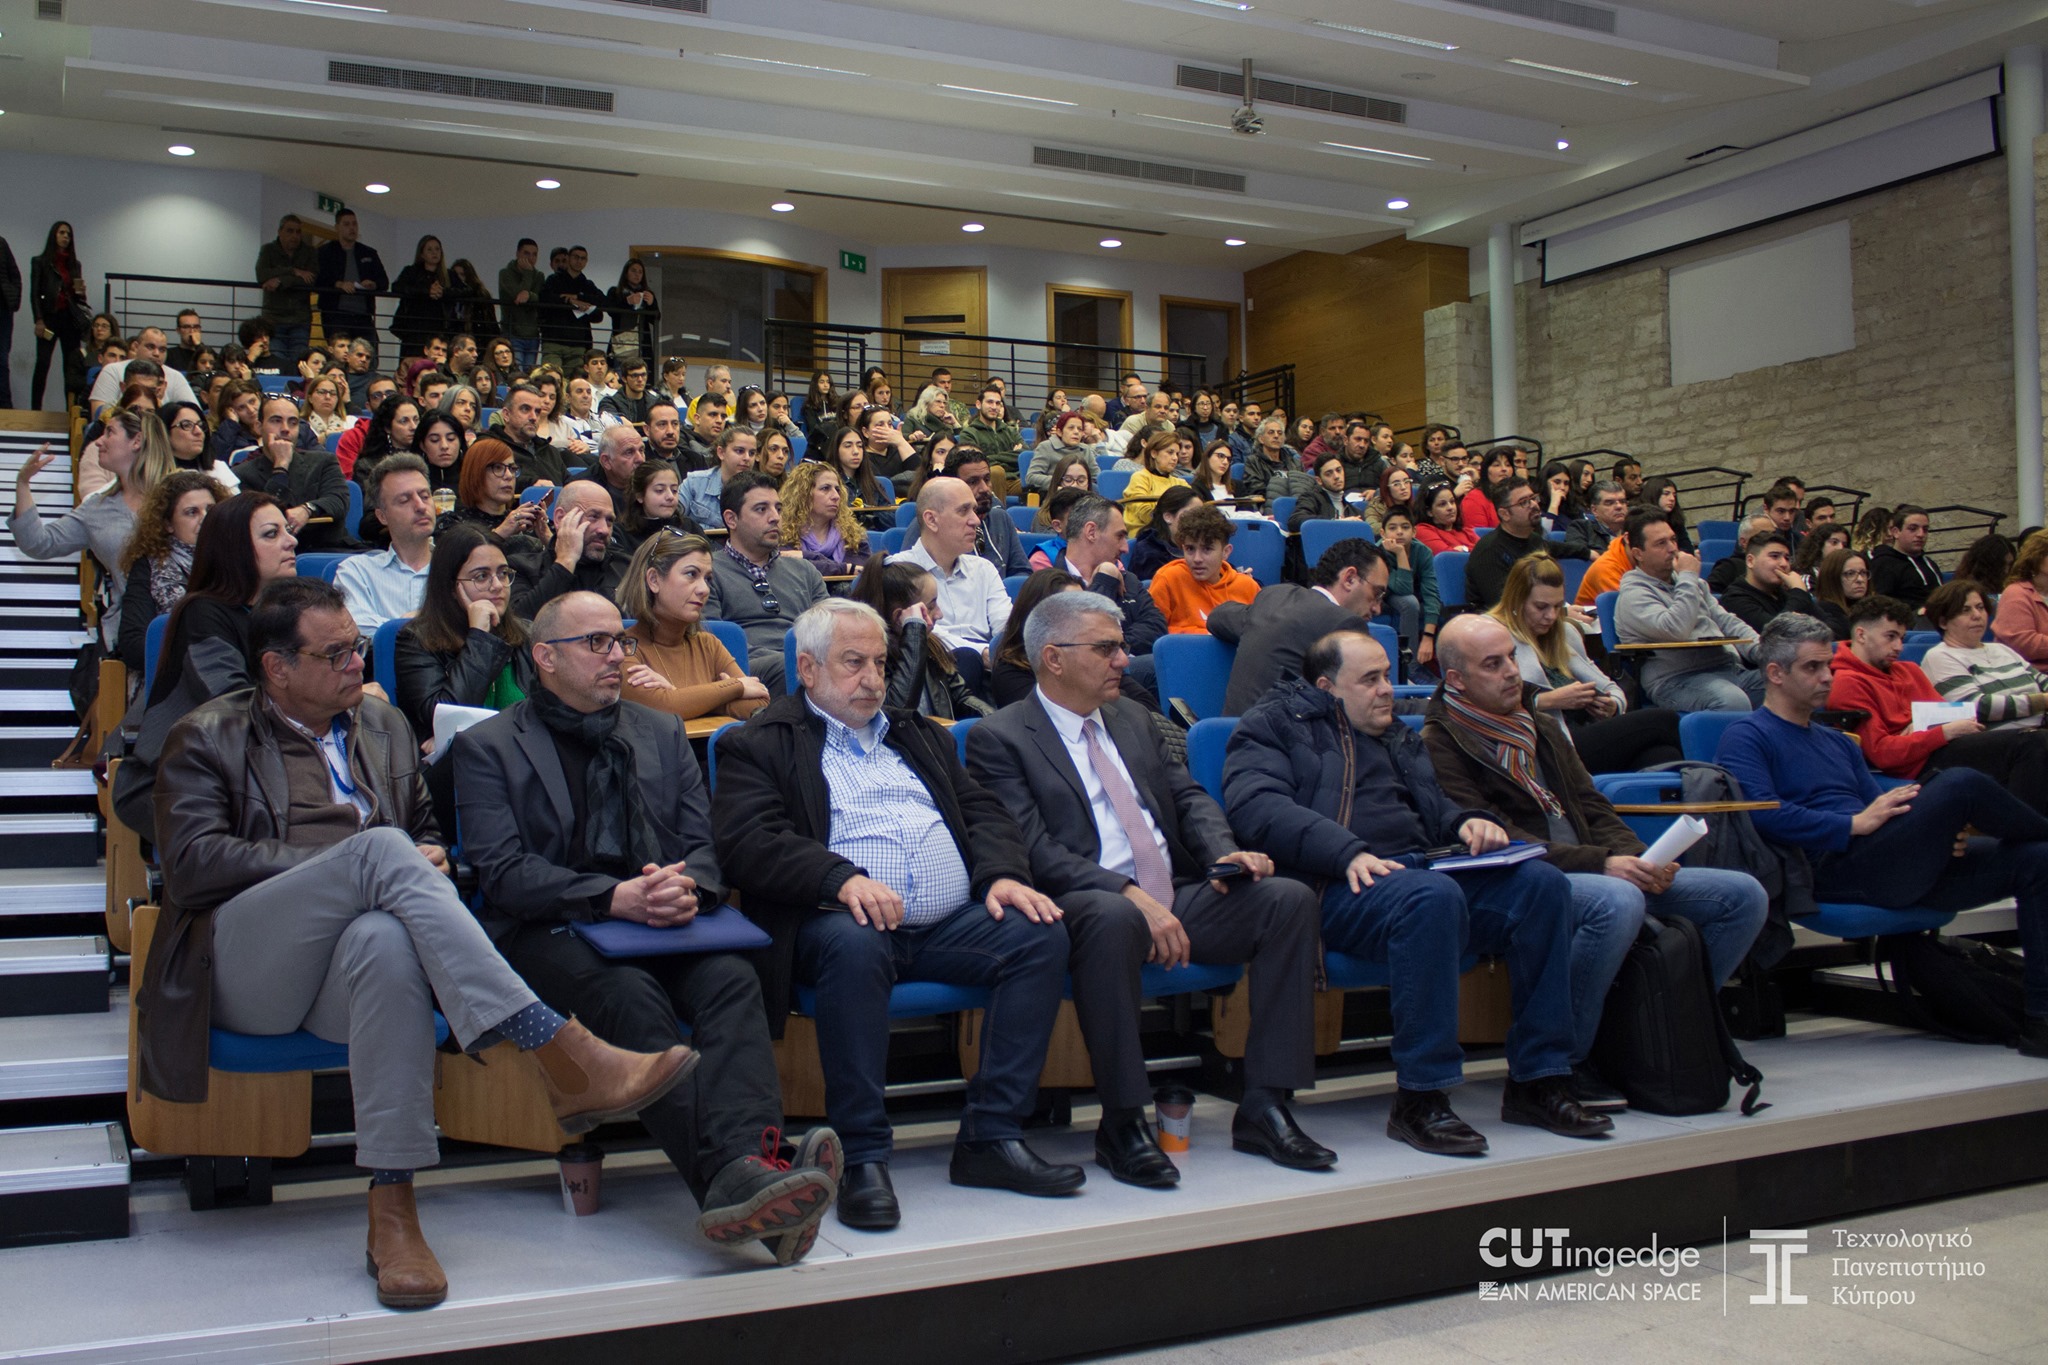 Open Day at the Cyprus University of Technology